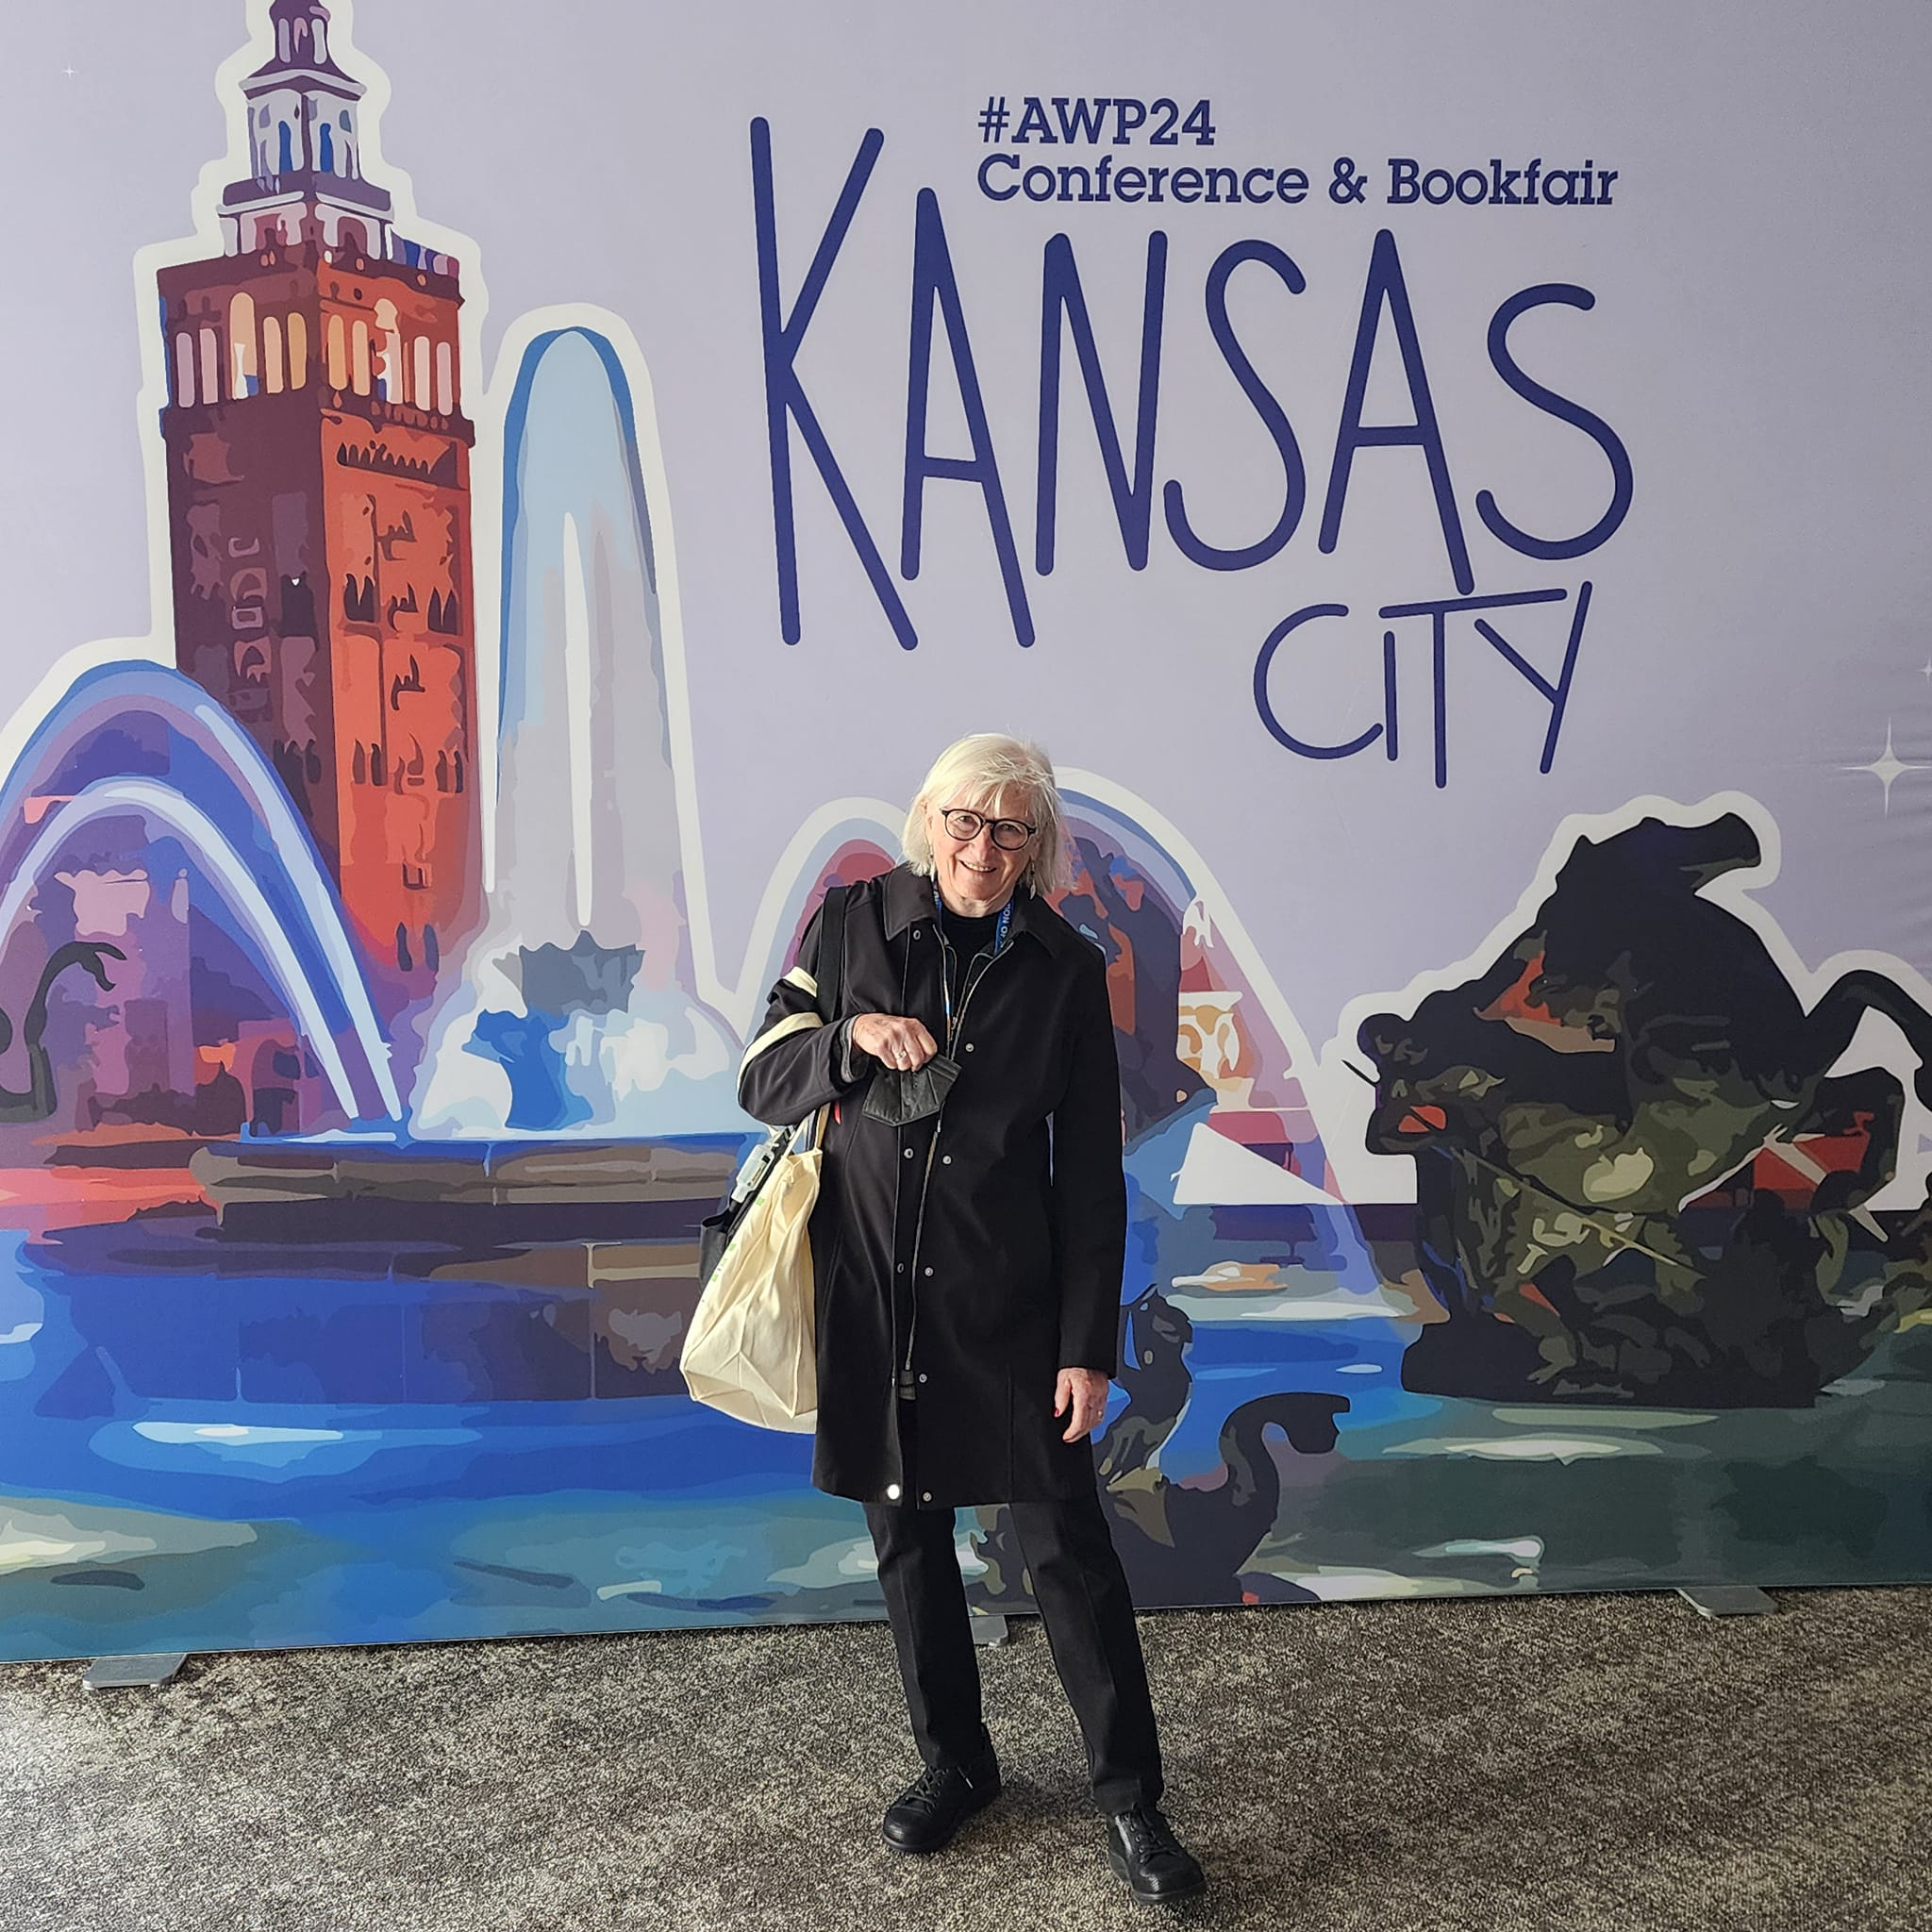 Madville author, Lee Zacharias poses in front of the AWP24 Conference & Bookfair banner in Kansas City.